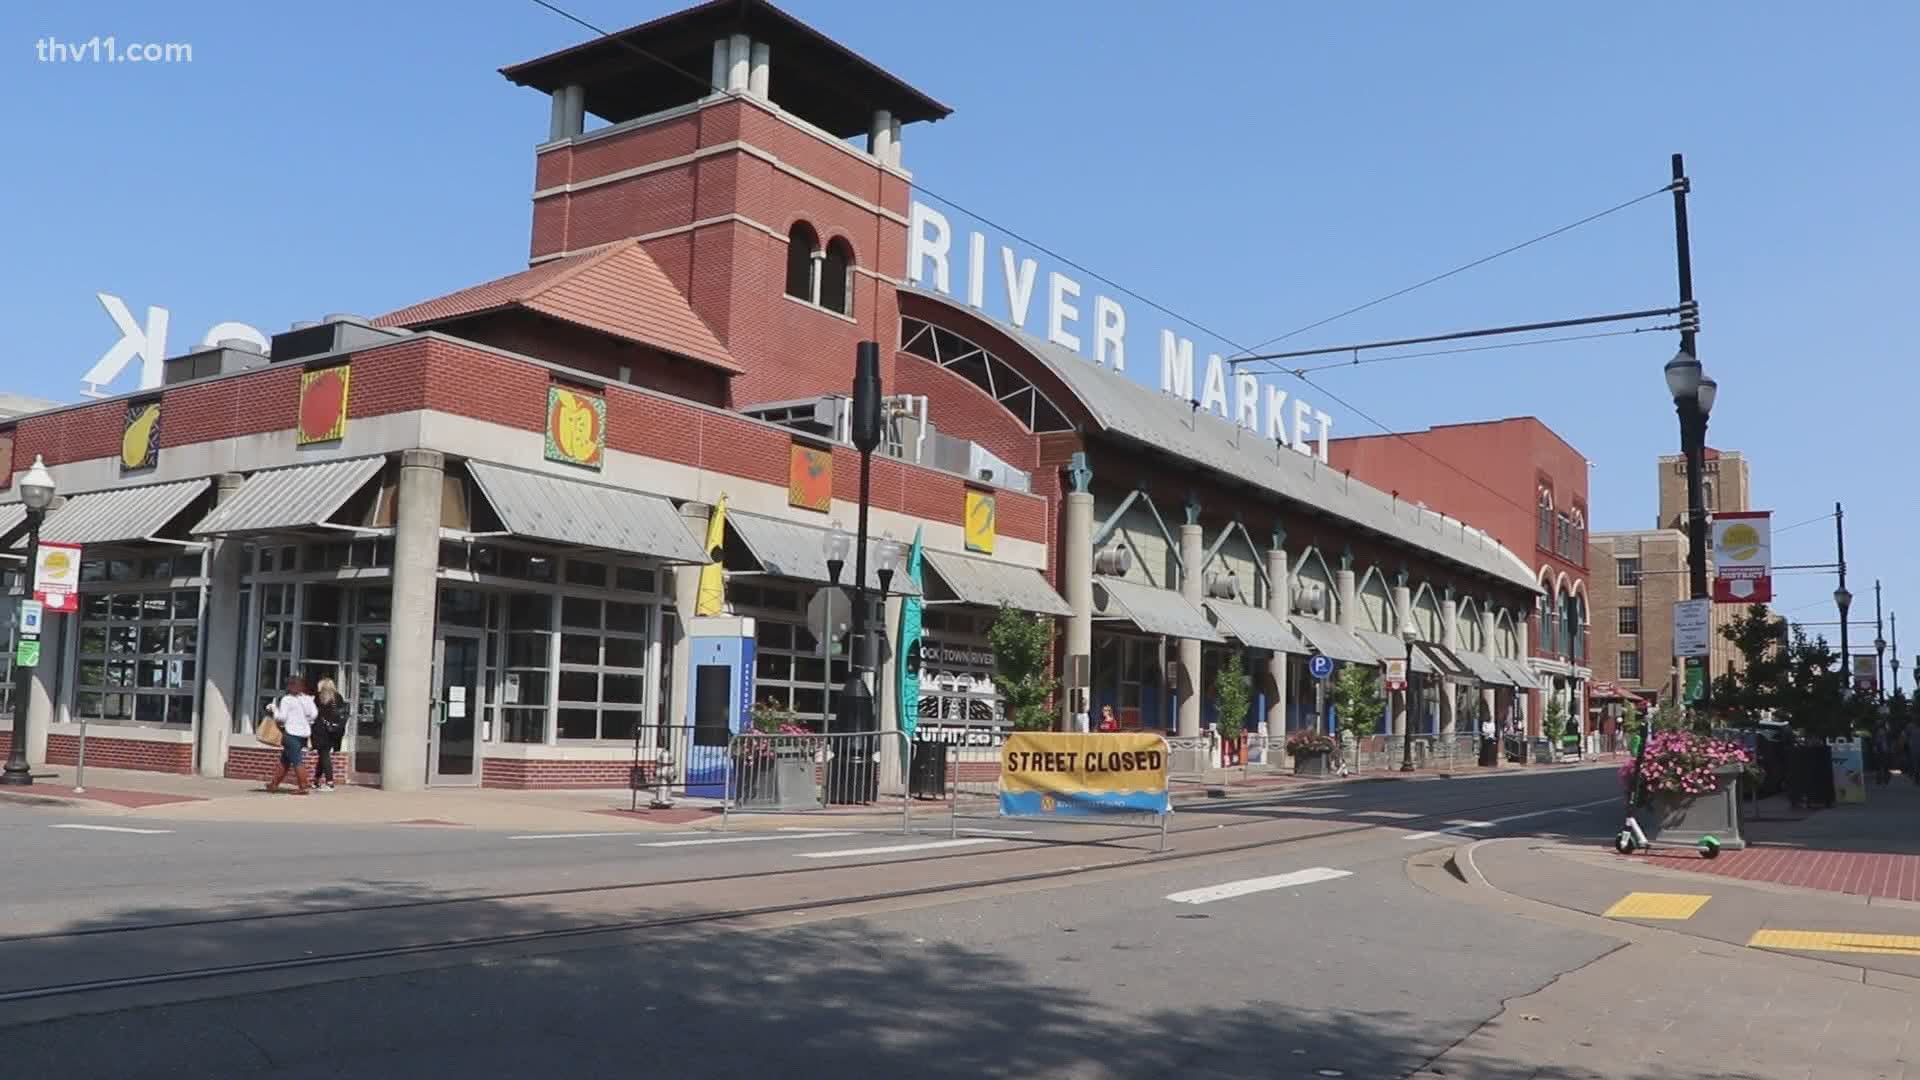 With perfect fall weather and local food at every corner, outdoor dining at the River Market may encourage more people to get out and have fun in a safe way!